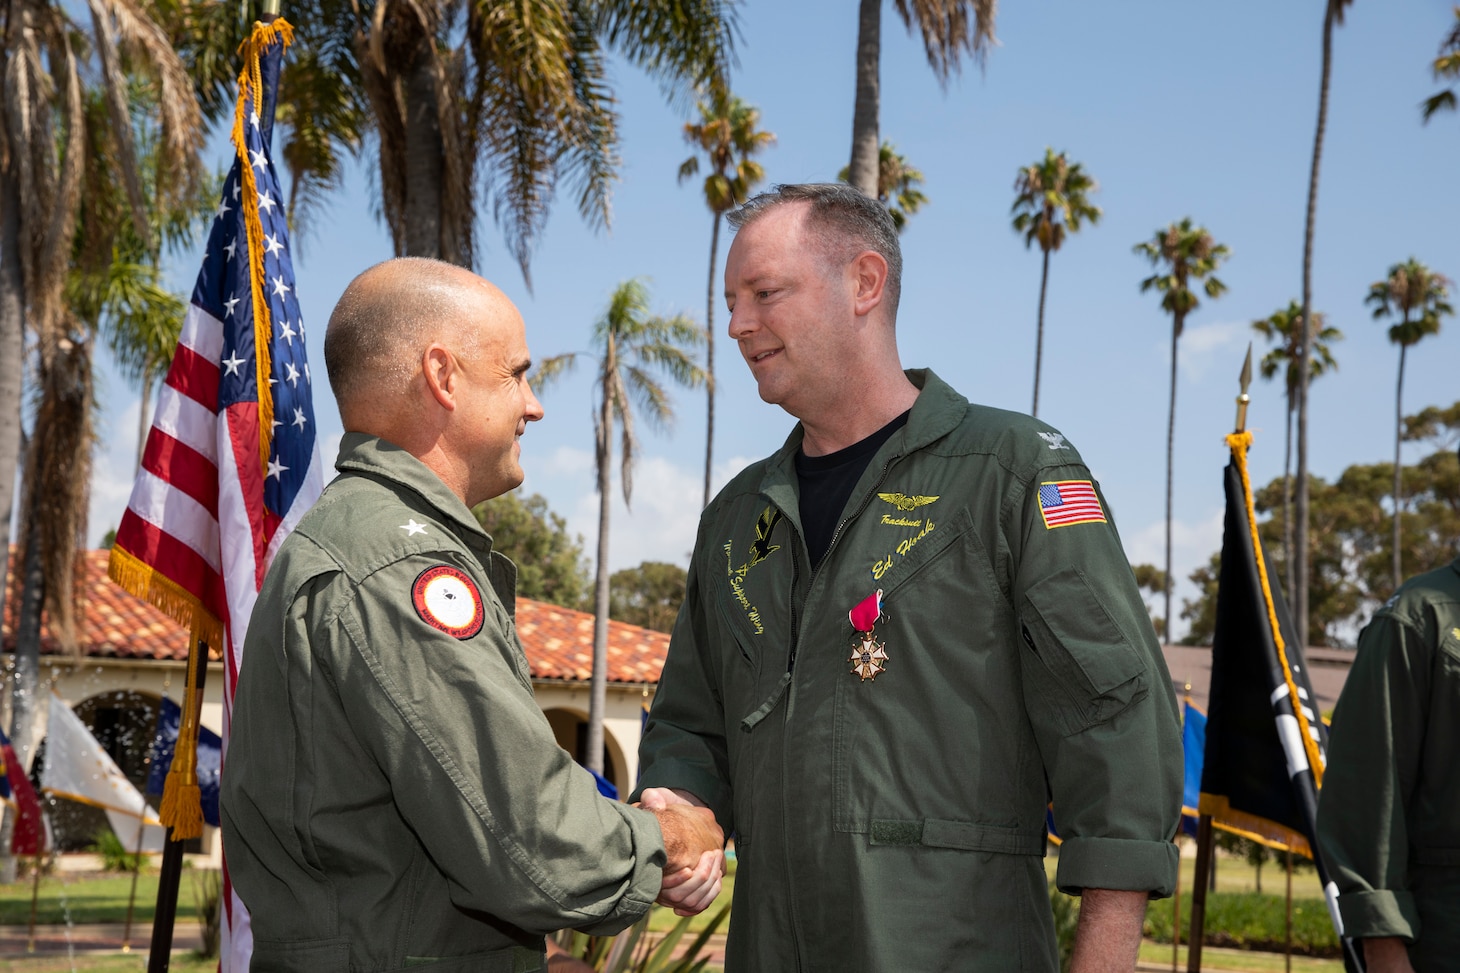 Commander, Naval Air Force Reserve Rear Adm. Brad Dunham (left) shakes the hand of outgoing Commodore, Maritime Support Wing (MSW) Capt. Edward Hoak (right) during the MSW Change of Command Ceremony.